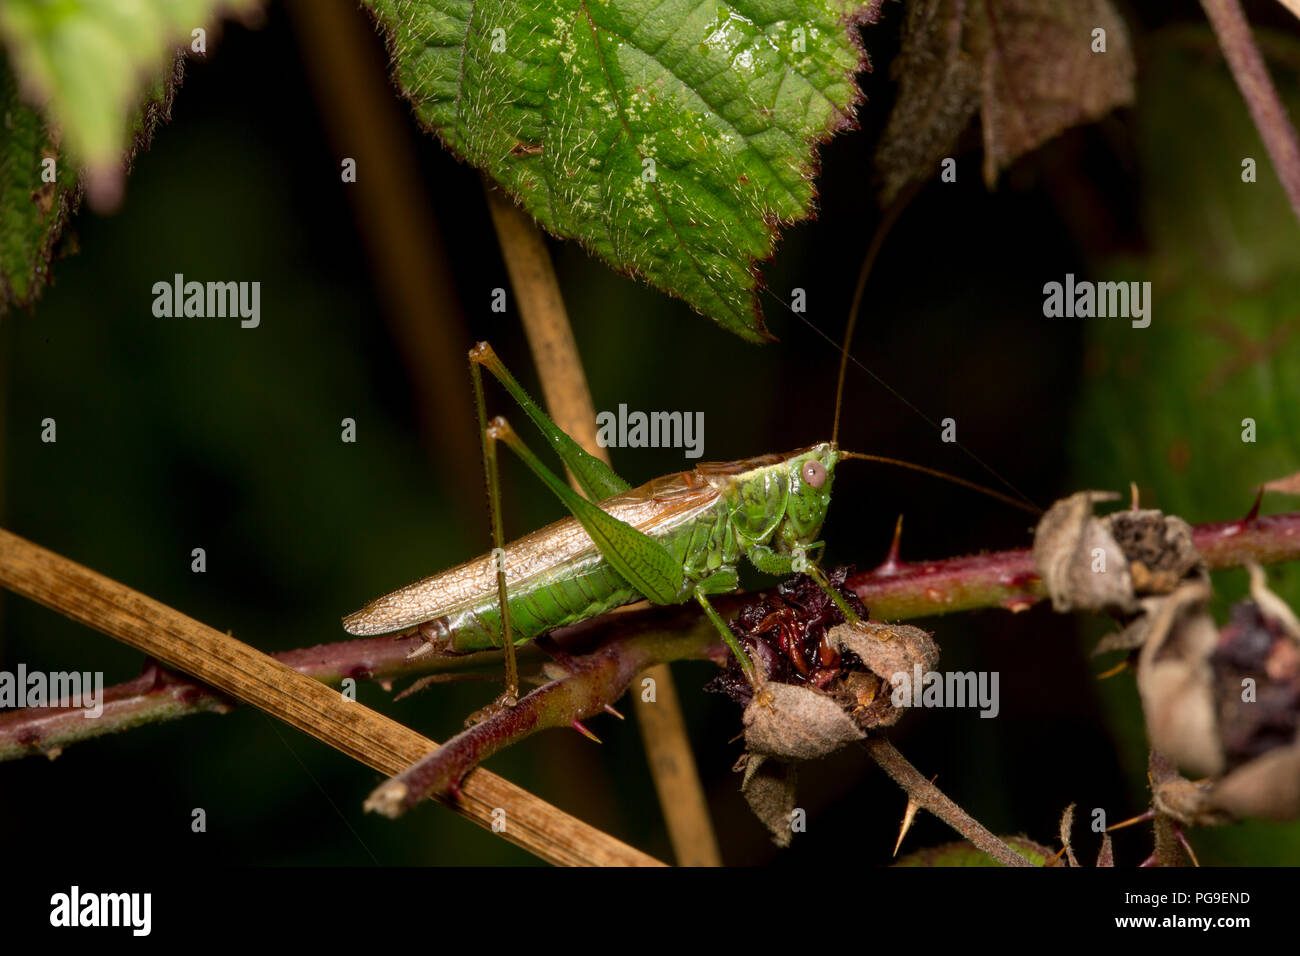 A male long-winged conehead cricket, Conocephalus discolor, resting amongst bramble leaves on a woodland edge in North Dorset England UK GB Stock Photo